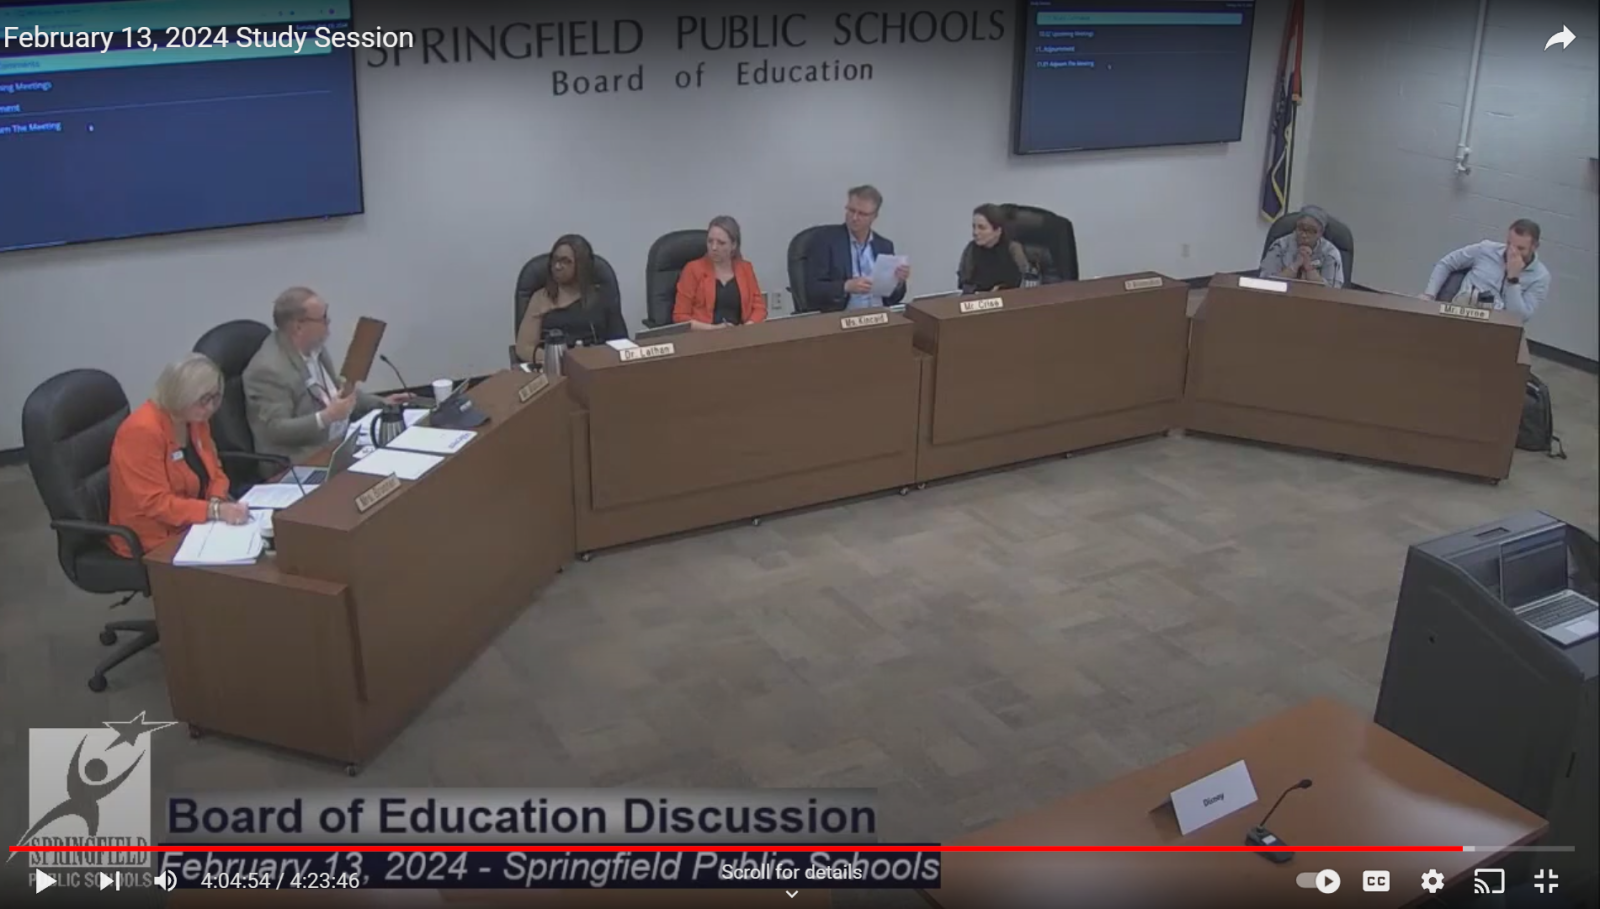 School board member's paddling proposal points to behavior problems